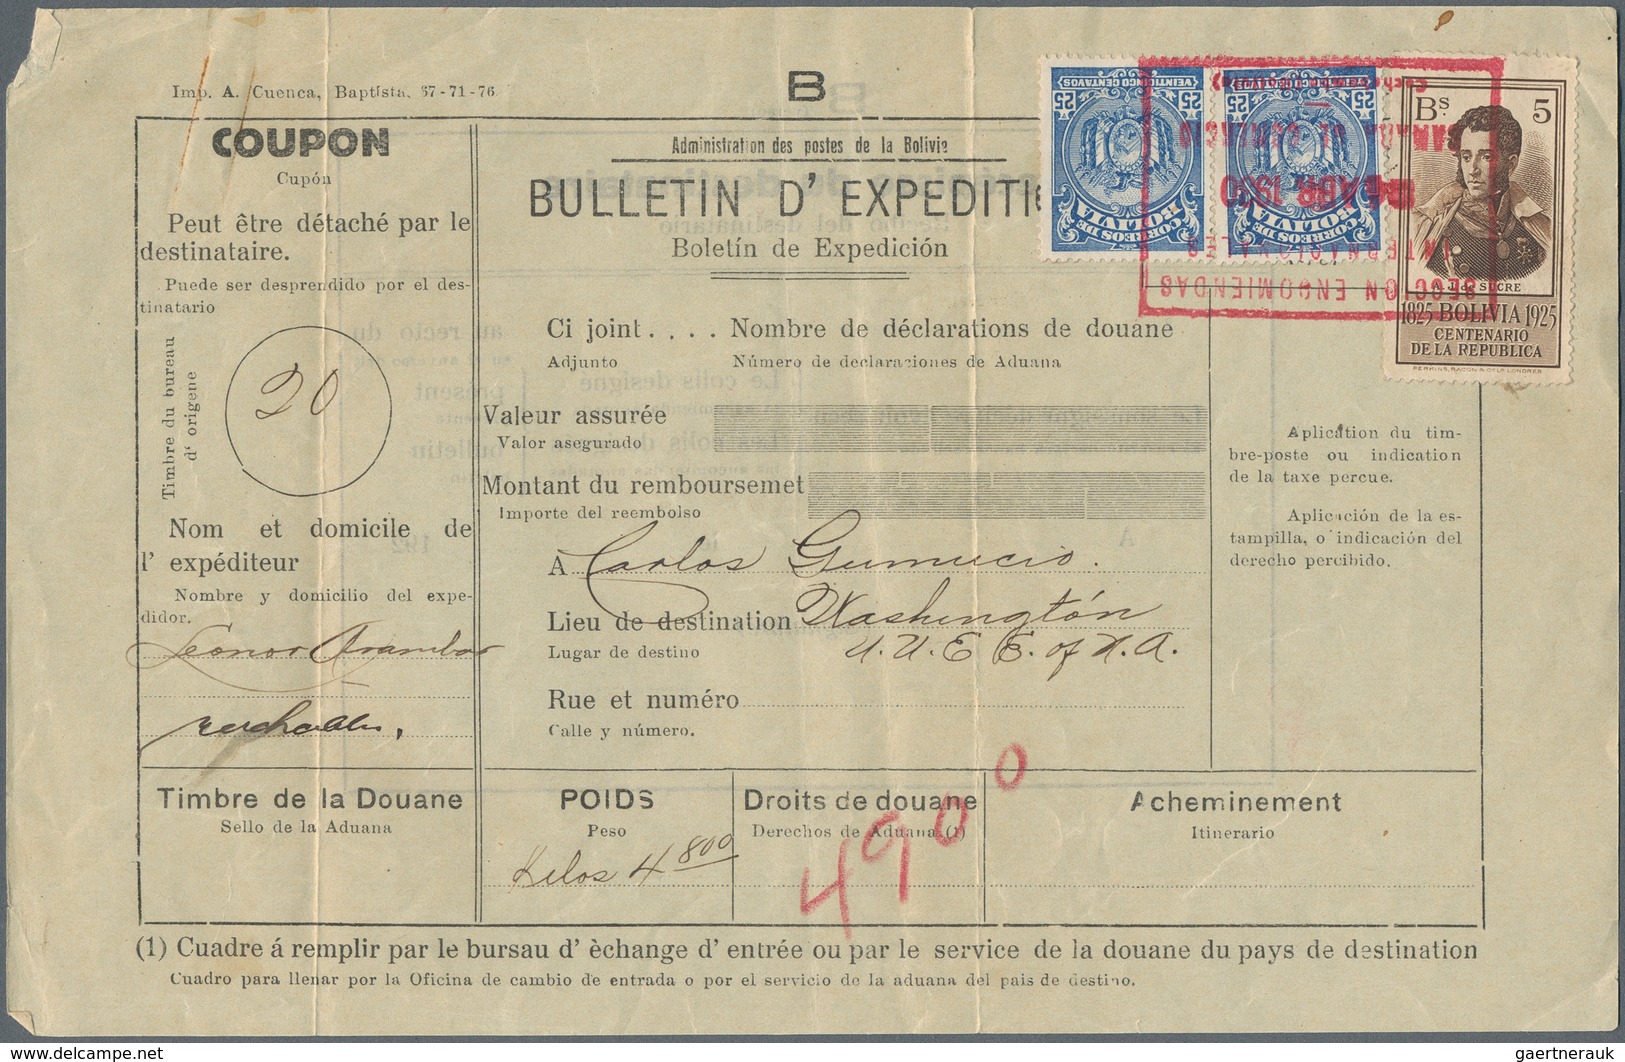 Bolivien: 1920s/1930s, Lot Of Fragments Of Parcel Despatch Forms Showing A Nice Range Of Frankings A - Bolivien